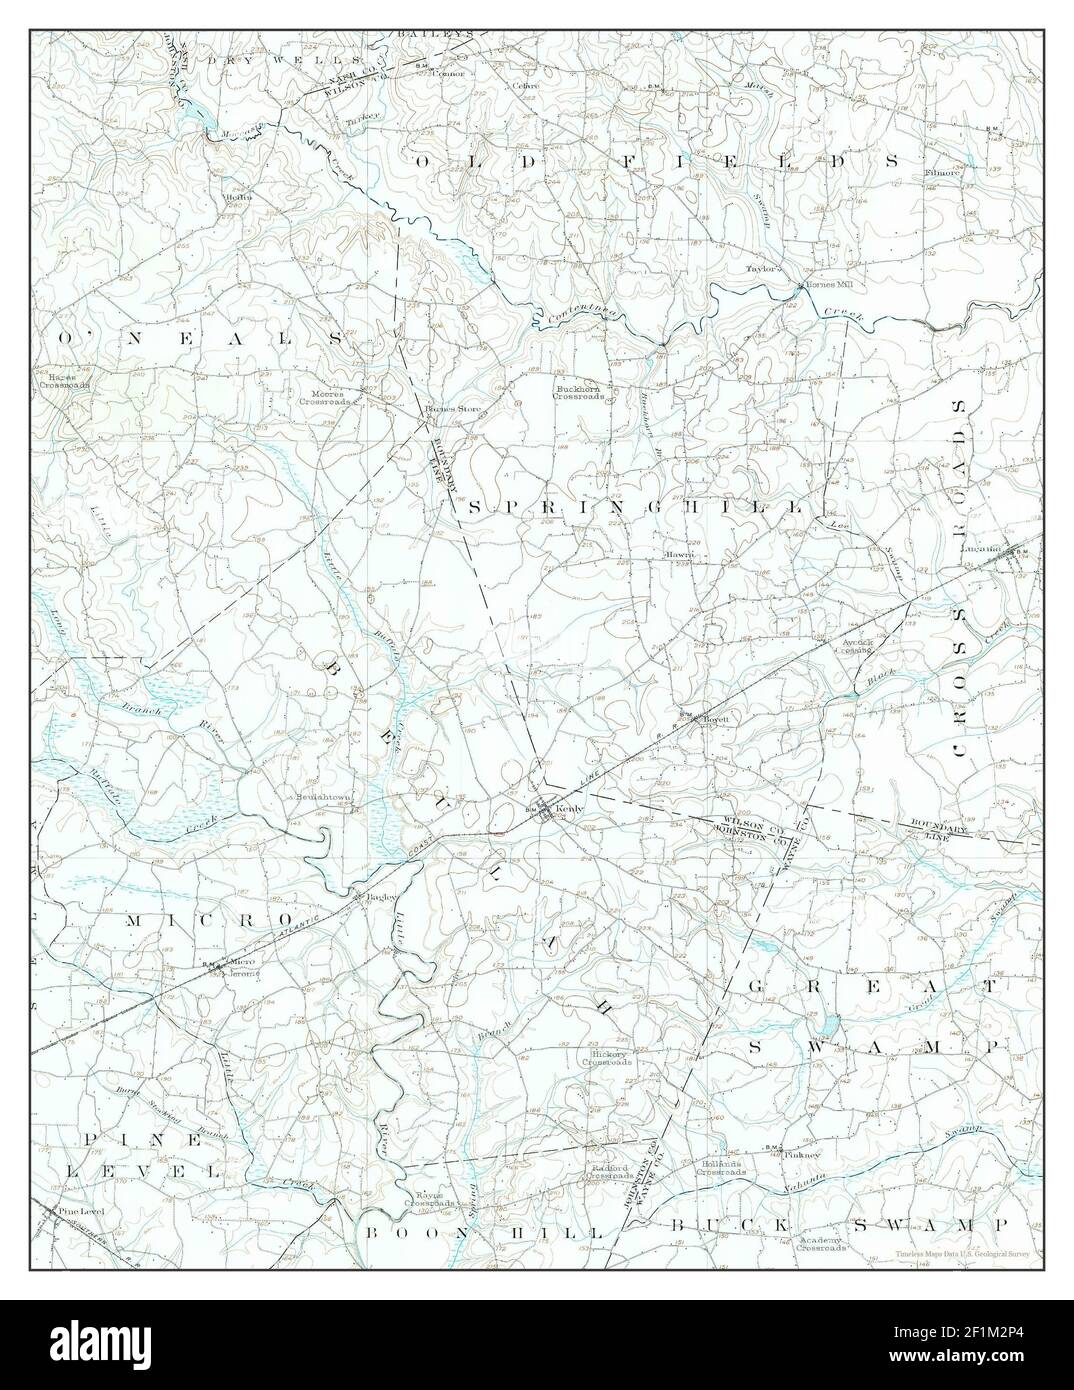 Kenly, North Carolina, map 1902, 1:62500, United States of America by ...